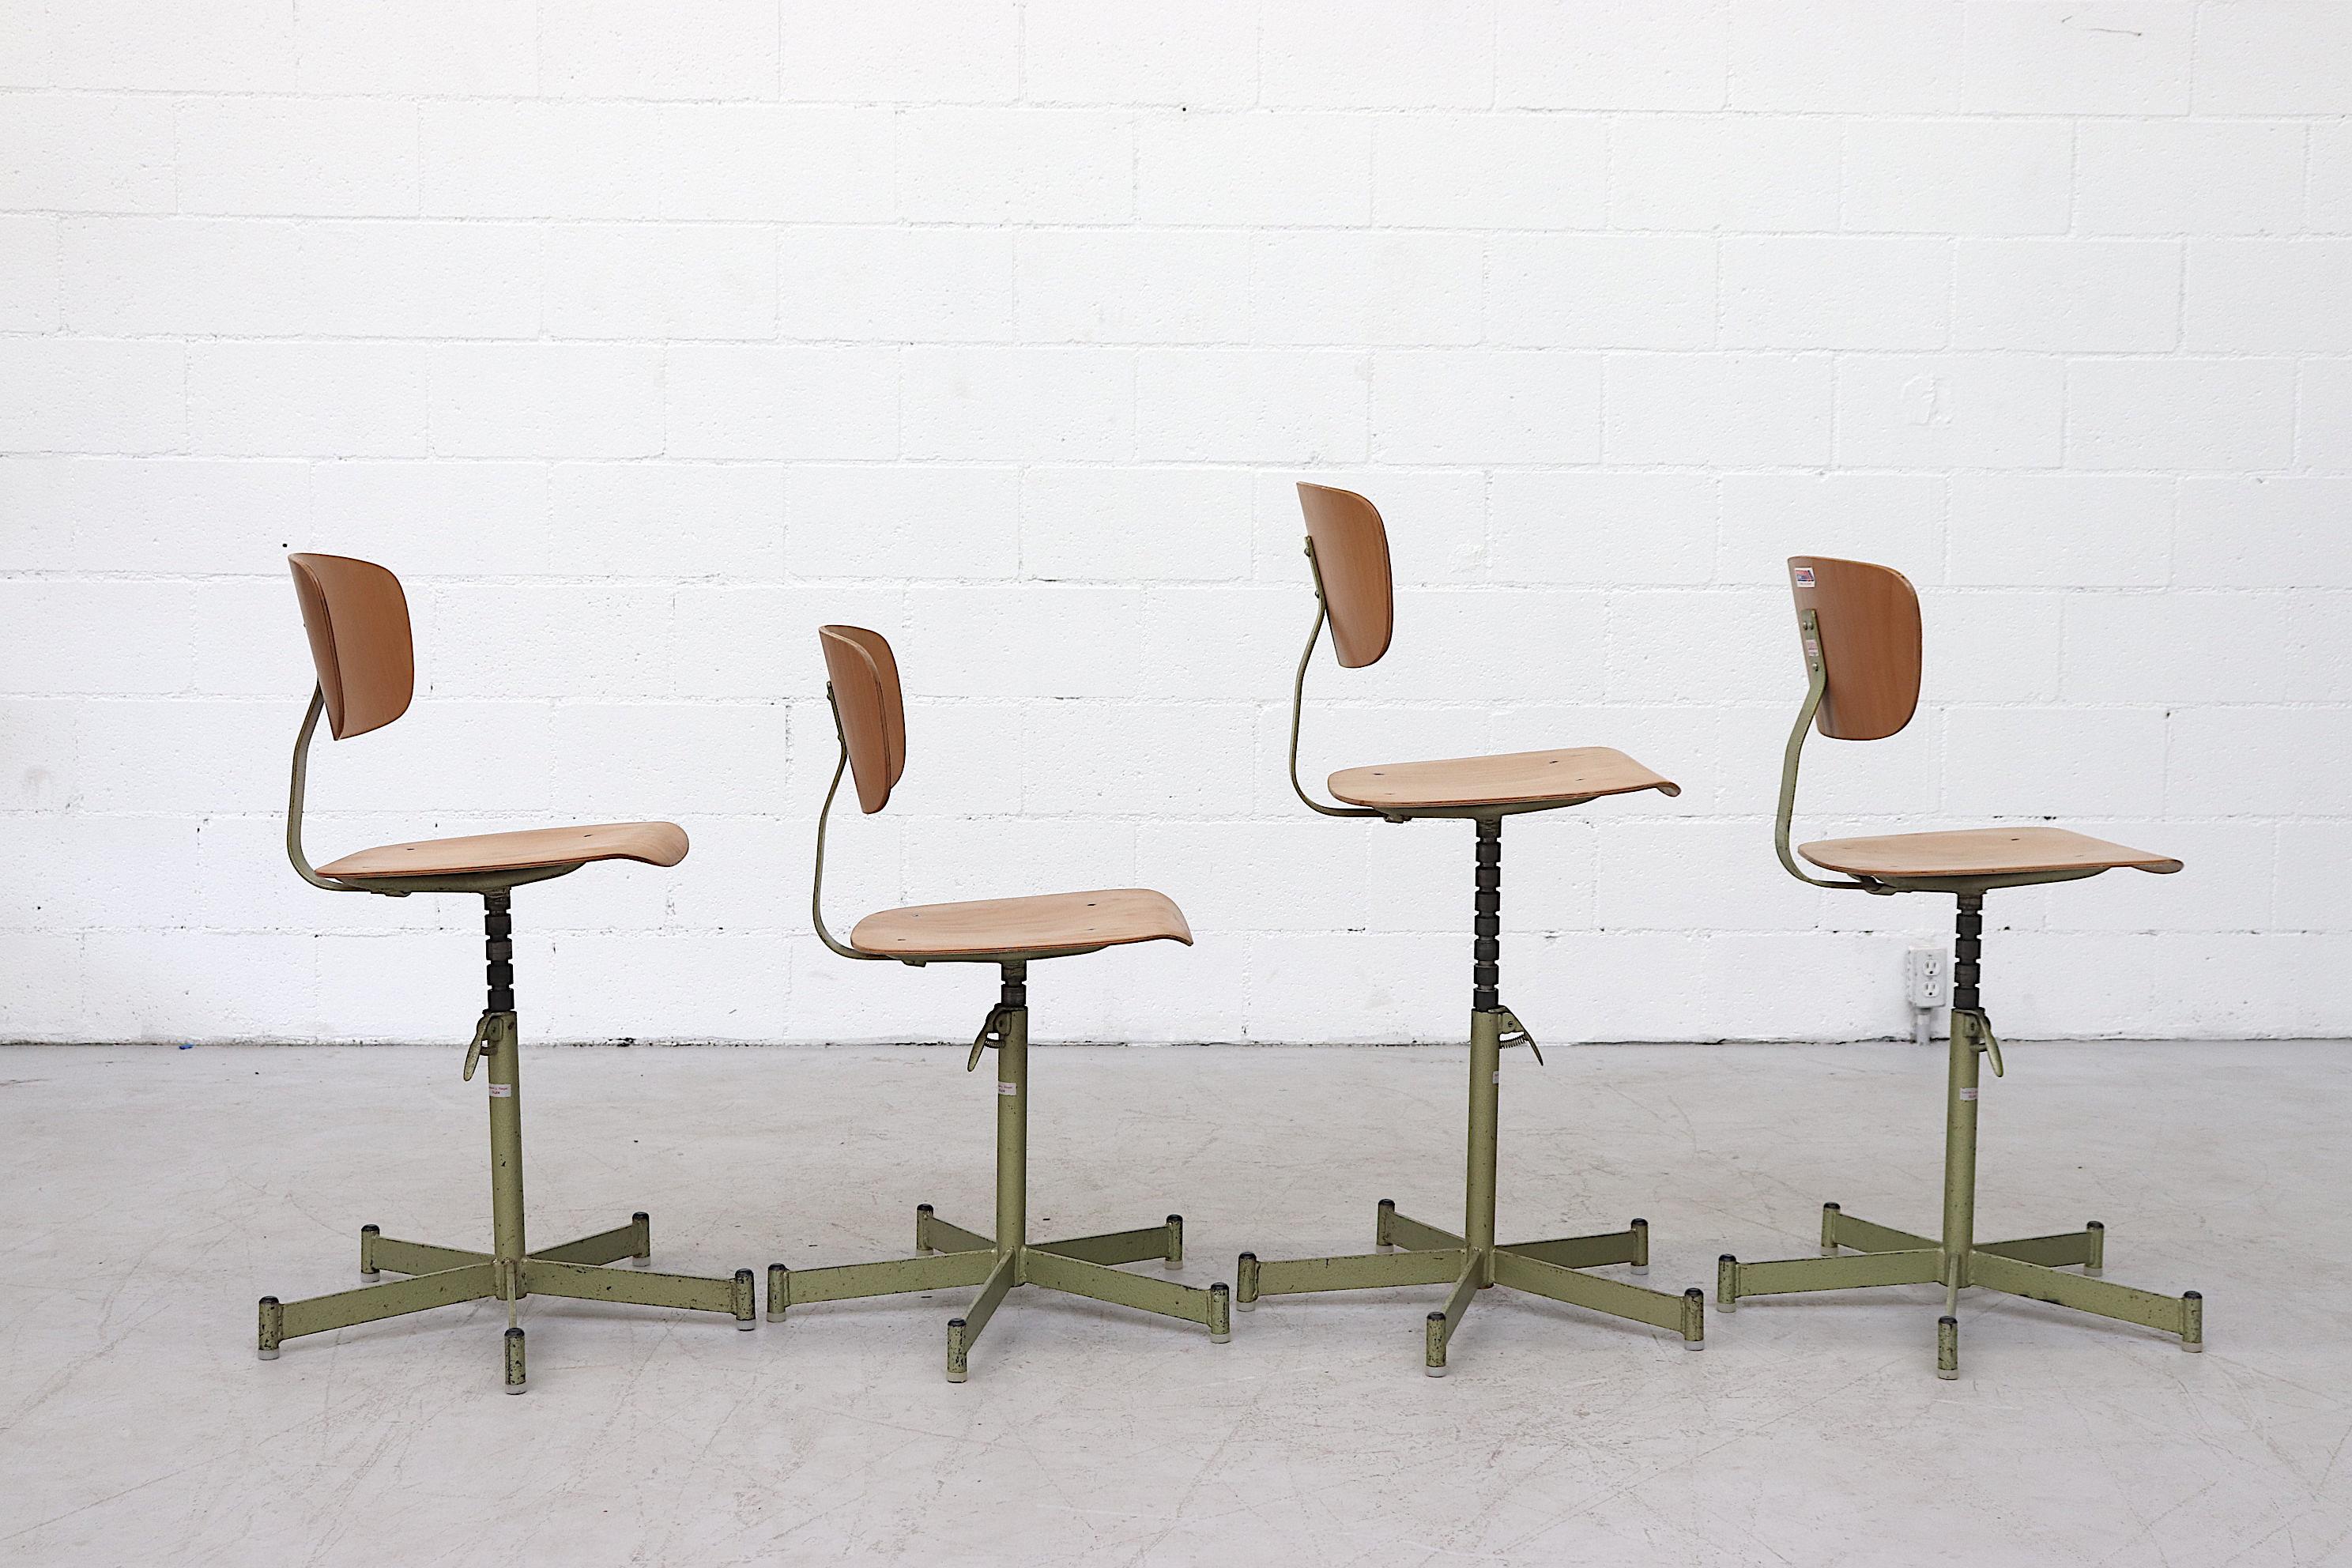 Awesome midcentury plywood drafting stools with moss green enameled tubular metal base and spring triggered height adjustable seat. In original condition with some wear consistent with its use. Priced individually.